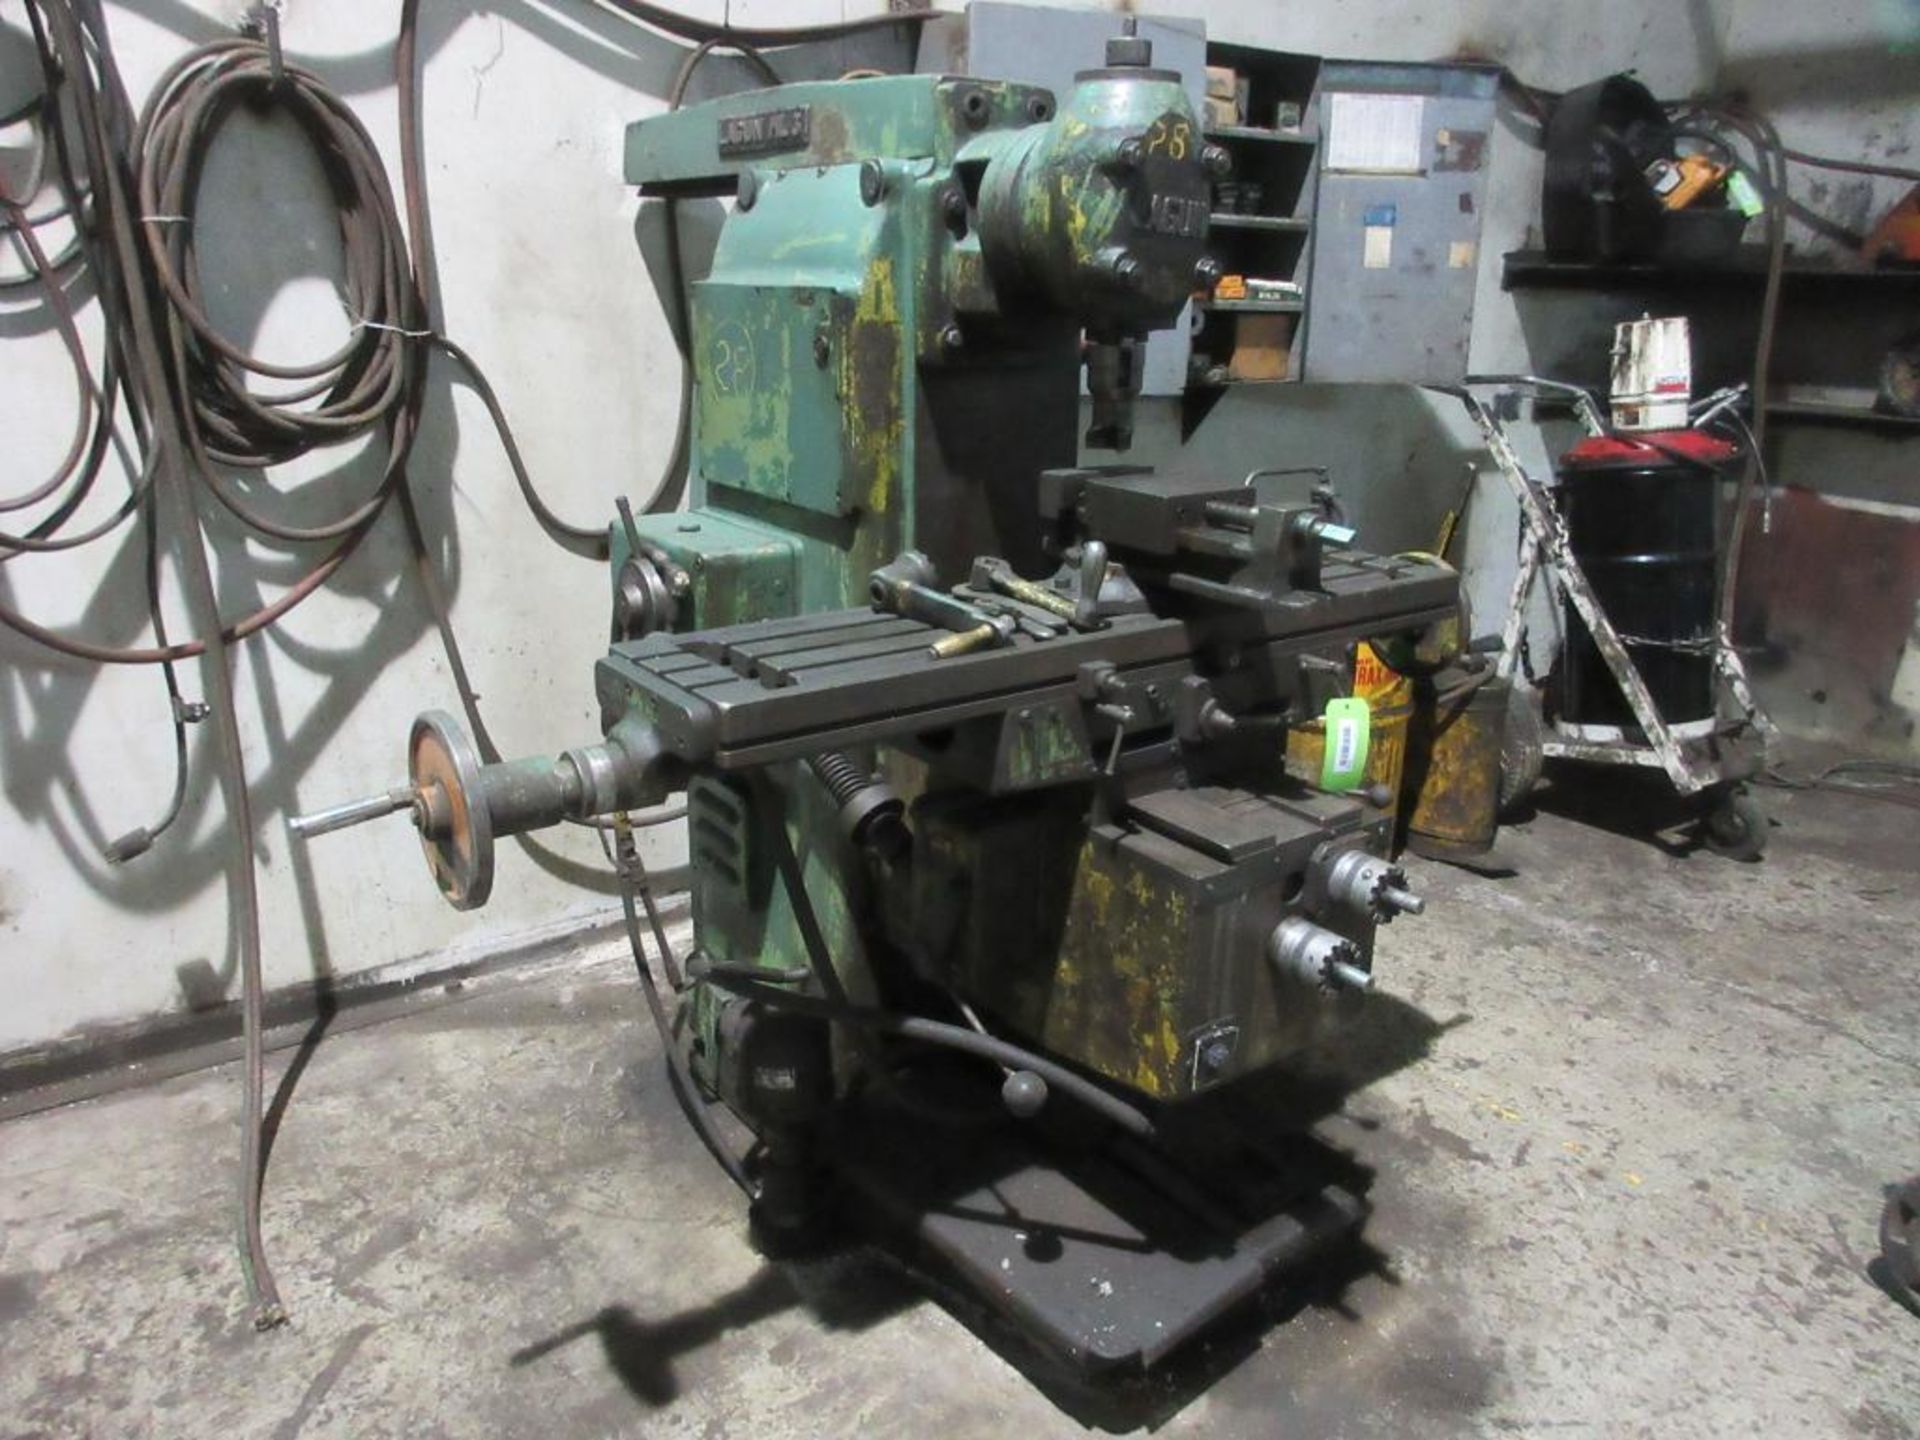 LAGUN MILLING MACHINE WITH 10' X 44" TABLE, 6" VISE, 3" SPINDLE WITH CUTTING TOOL, 28 TO 606RPM (EAS - Image 6 of 6